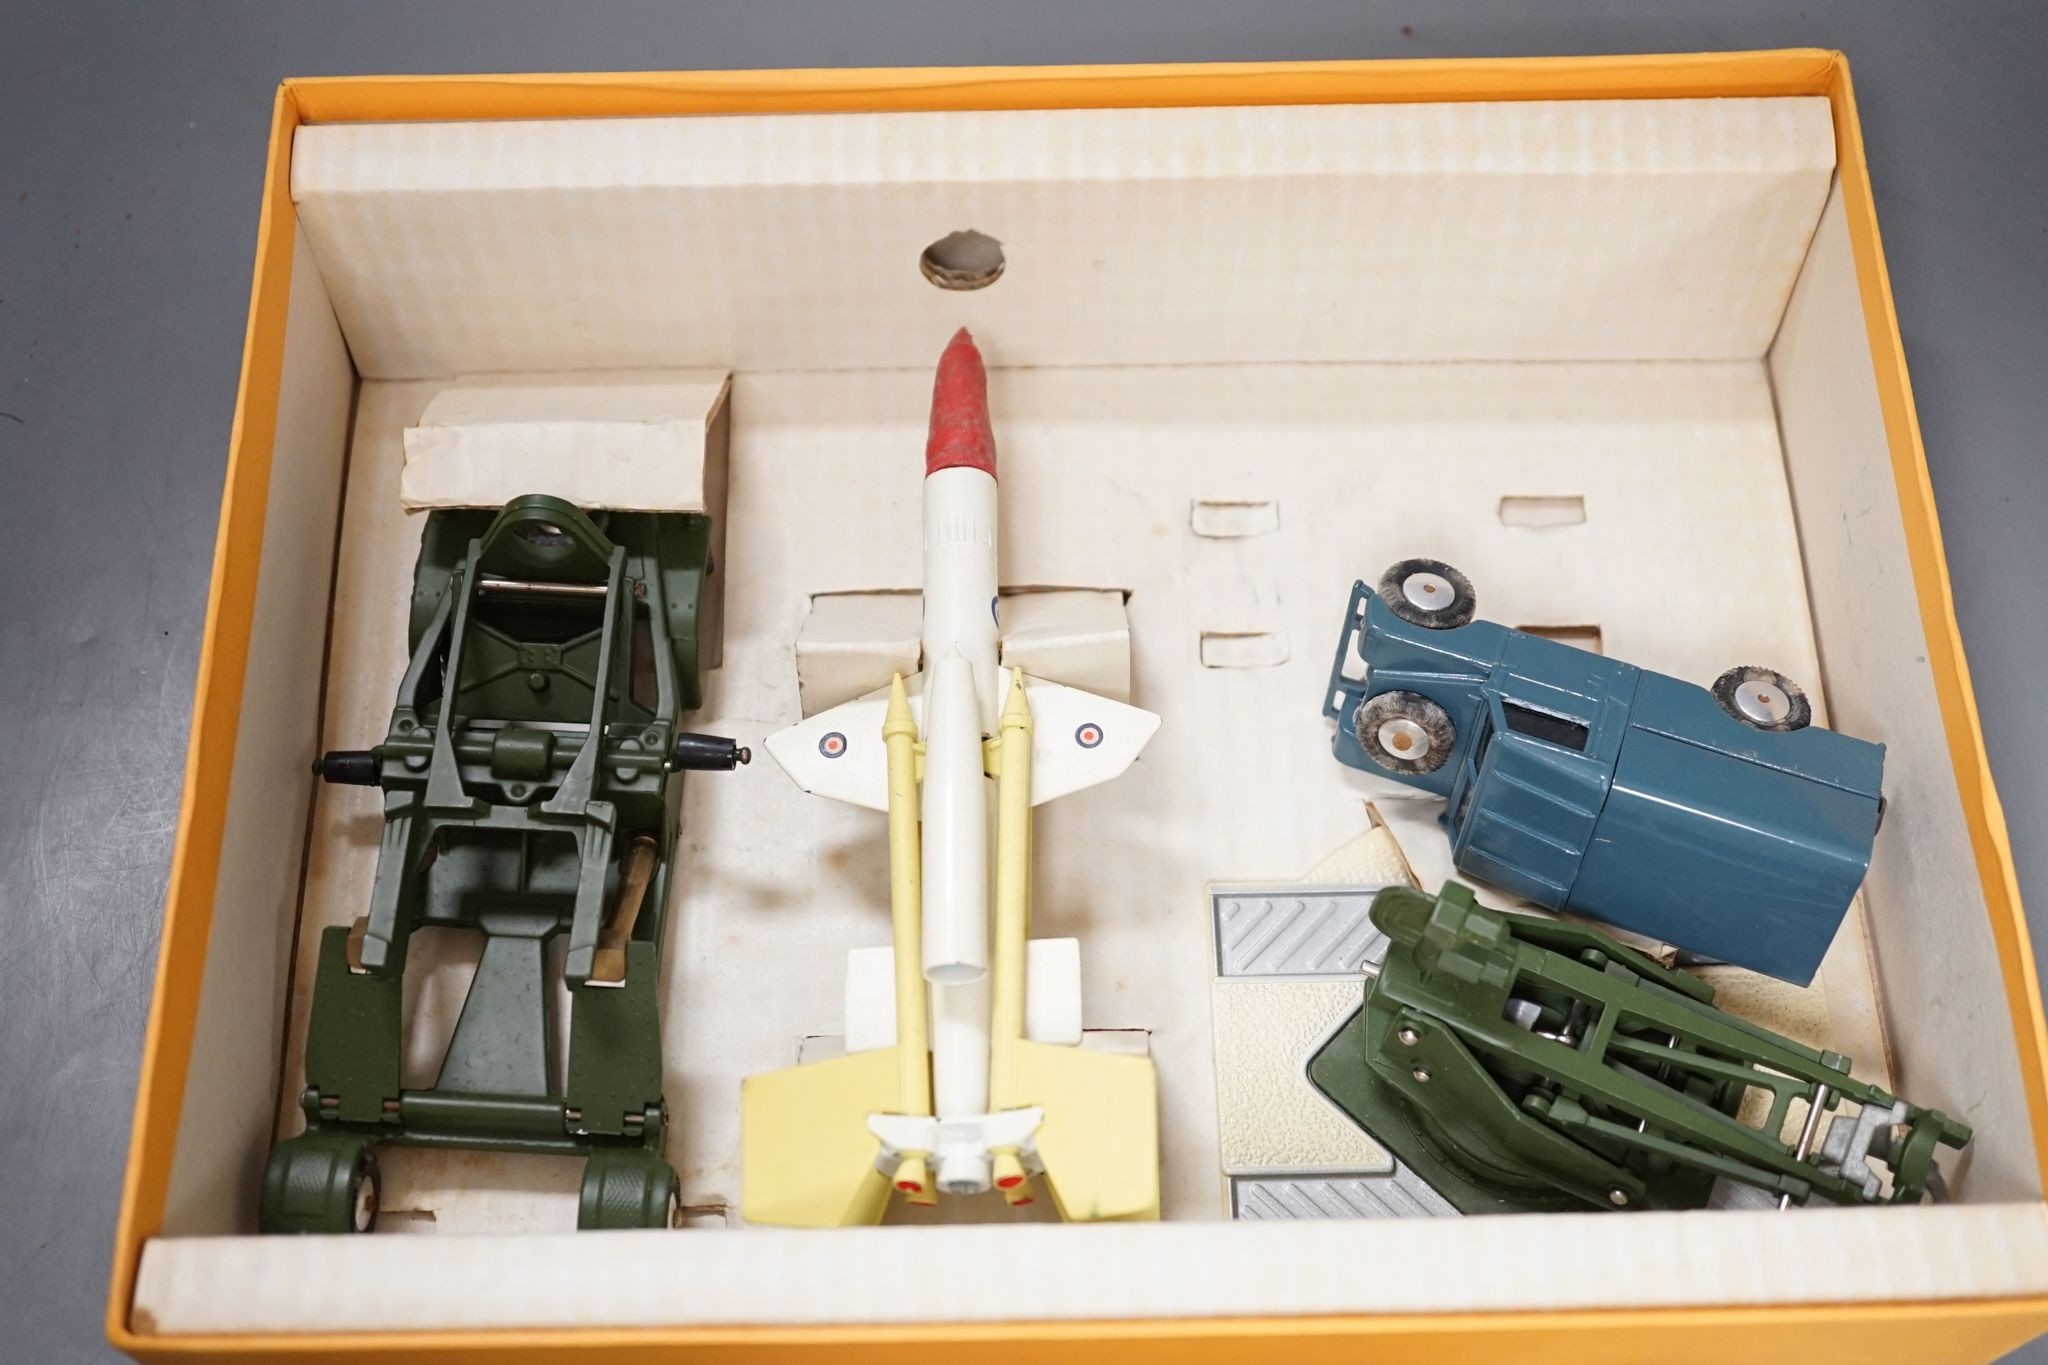 A Corgi 1106 Decca mobile airfield radar, a 1102 Euclid TC-12 tractor with dozer blade and Gift Set 4 bloodhound guided missile with ramp trolley and RAF Land Rover, all boxed